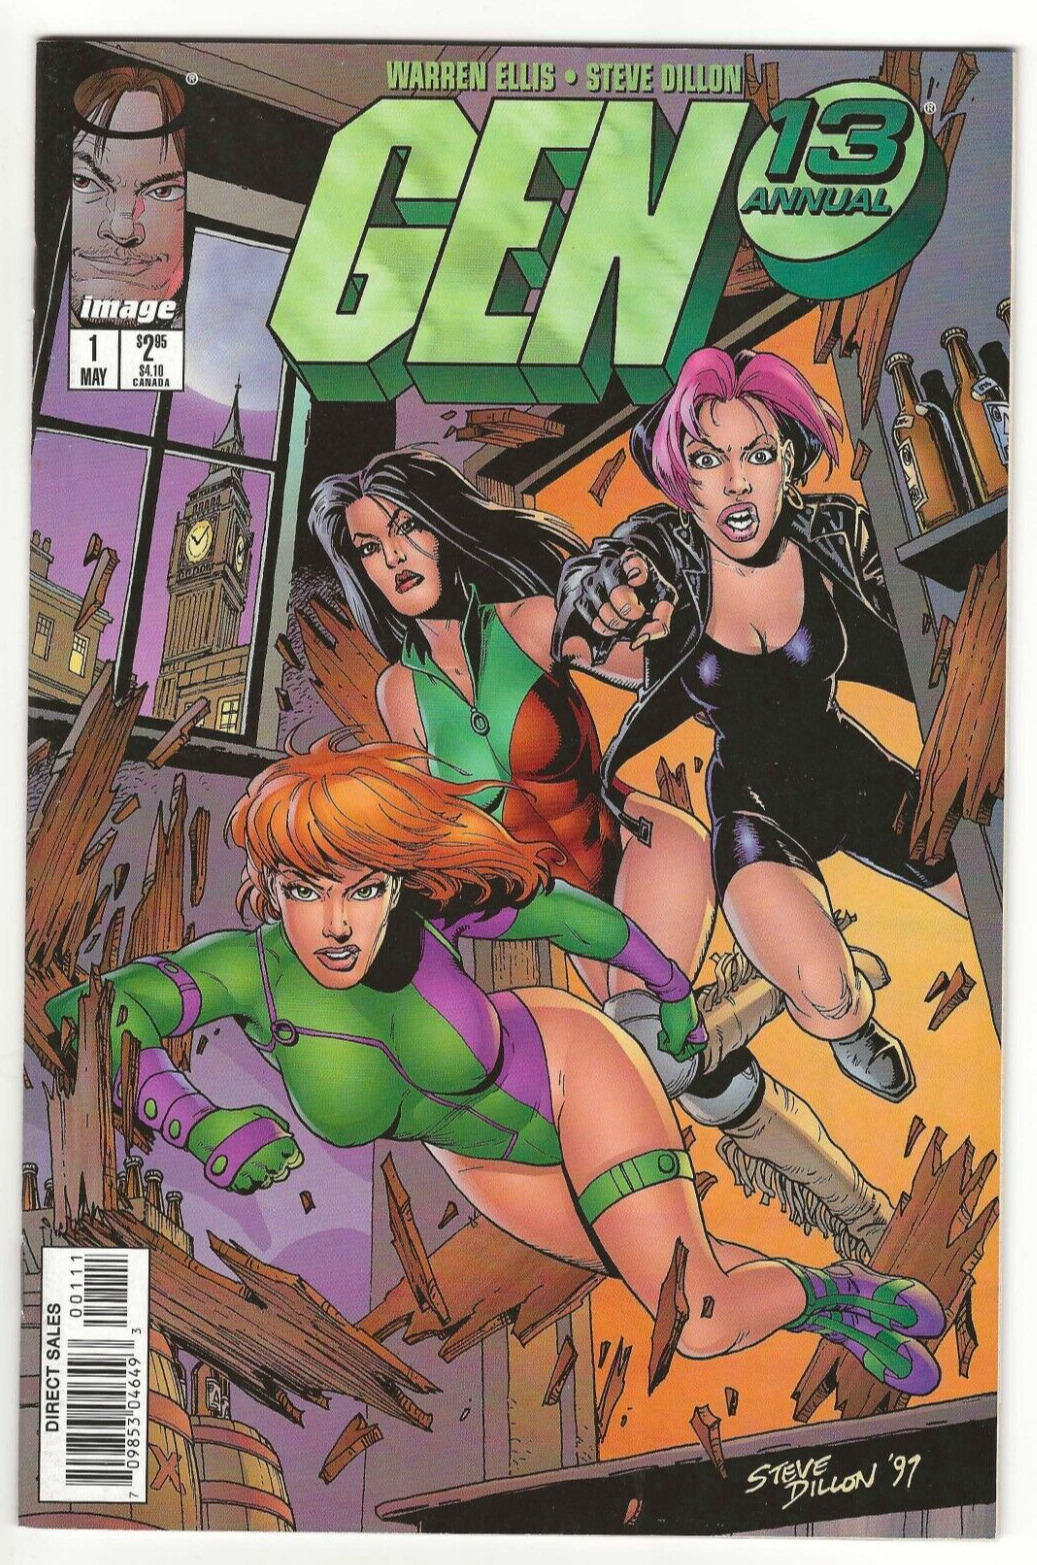 Image Comics GEN 13 ANNUAL #1 first printing cover A